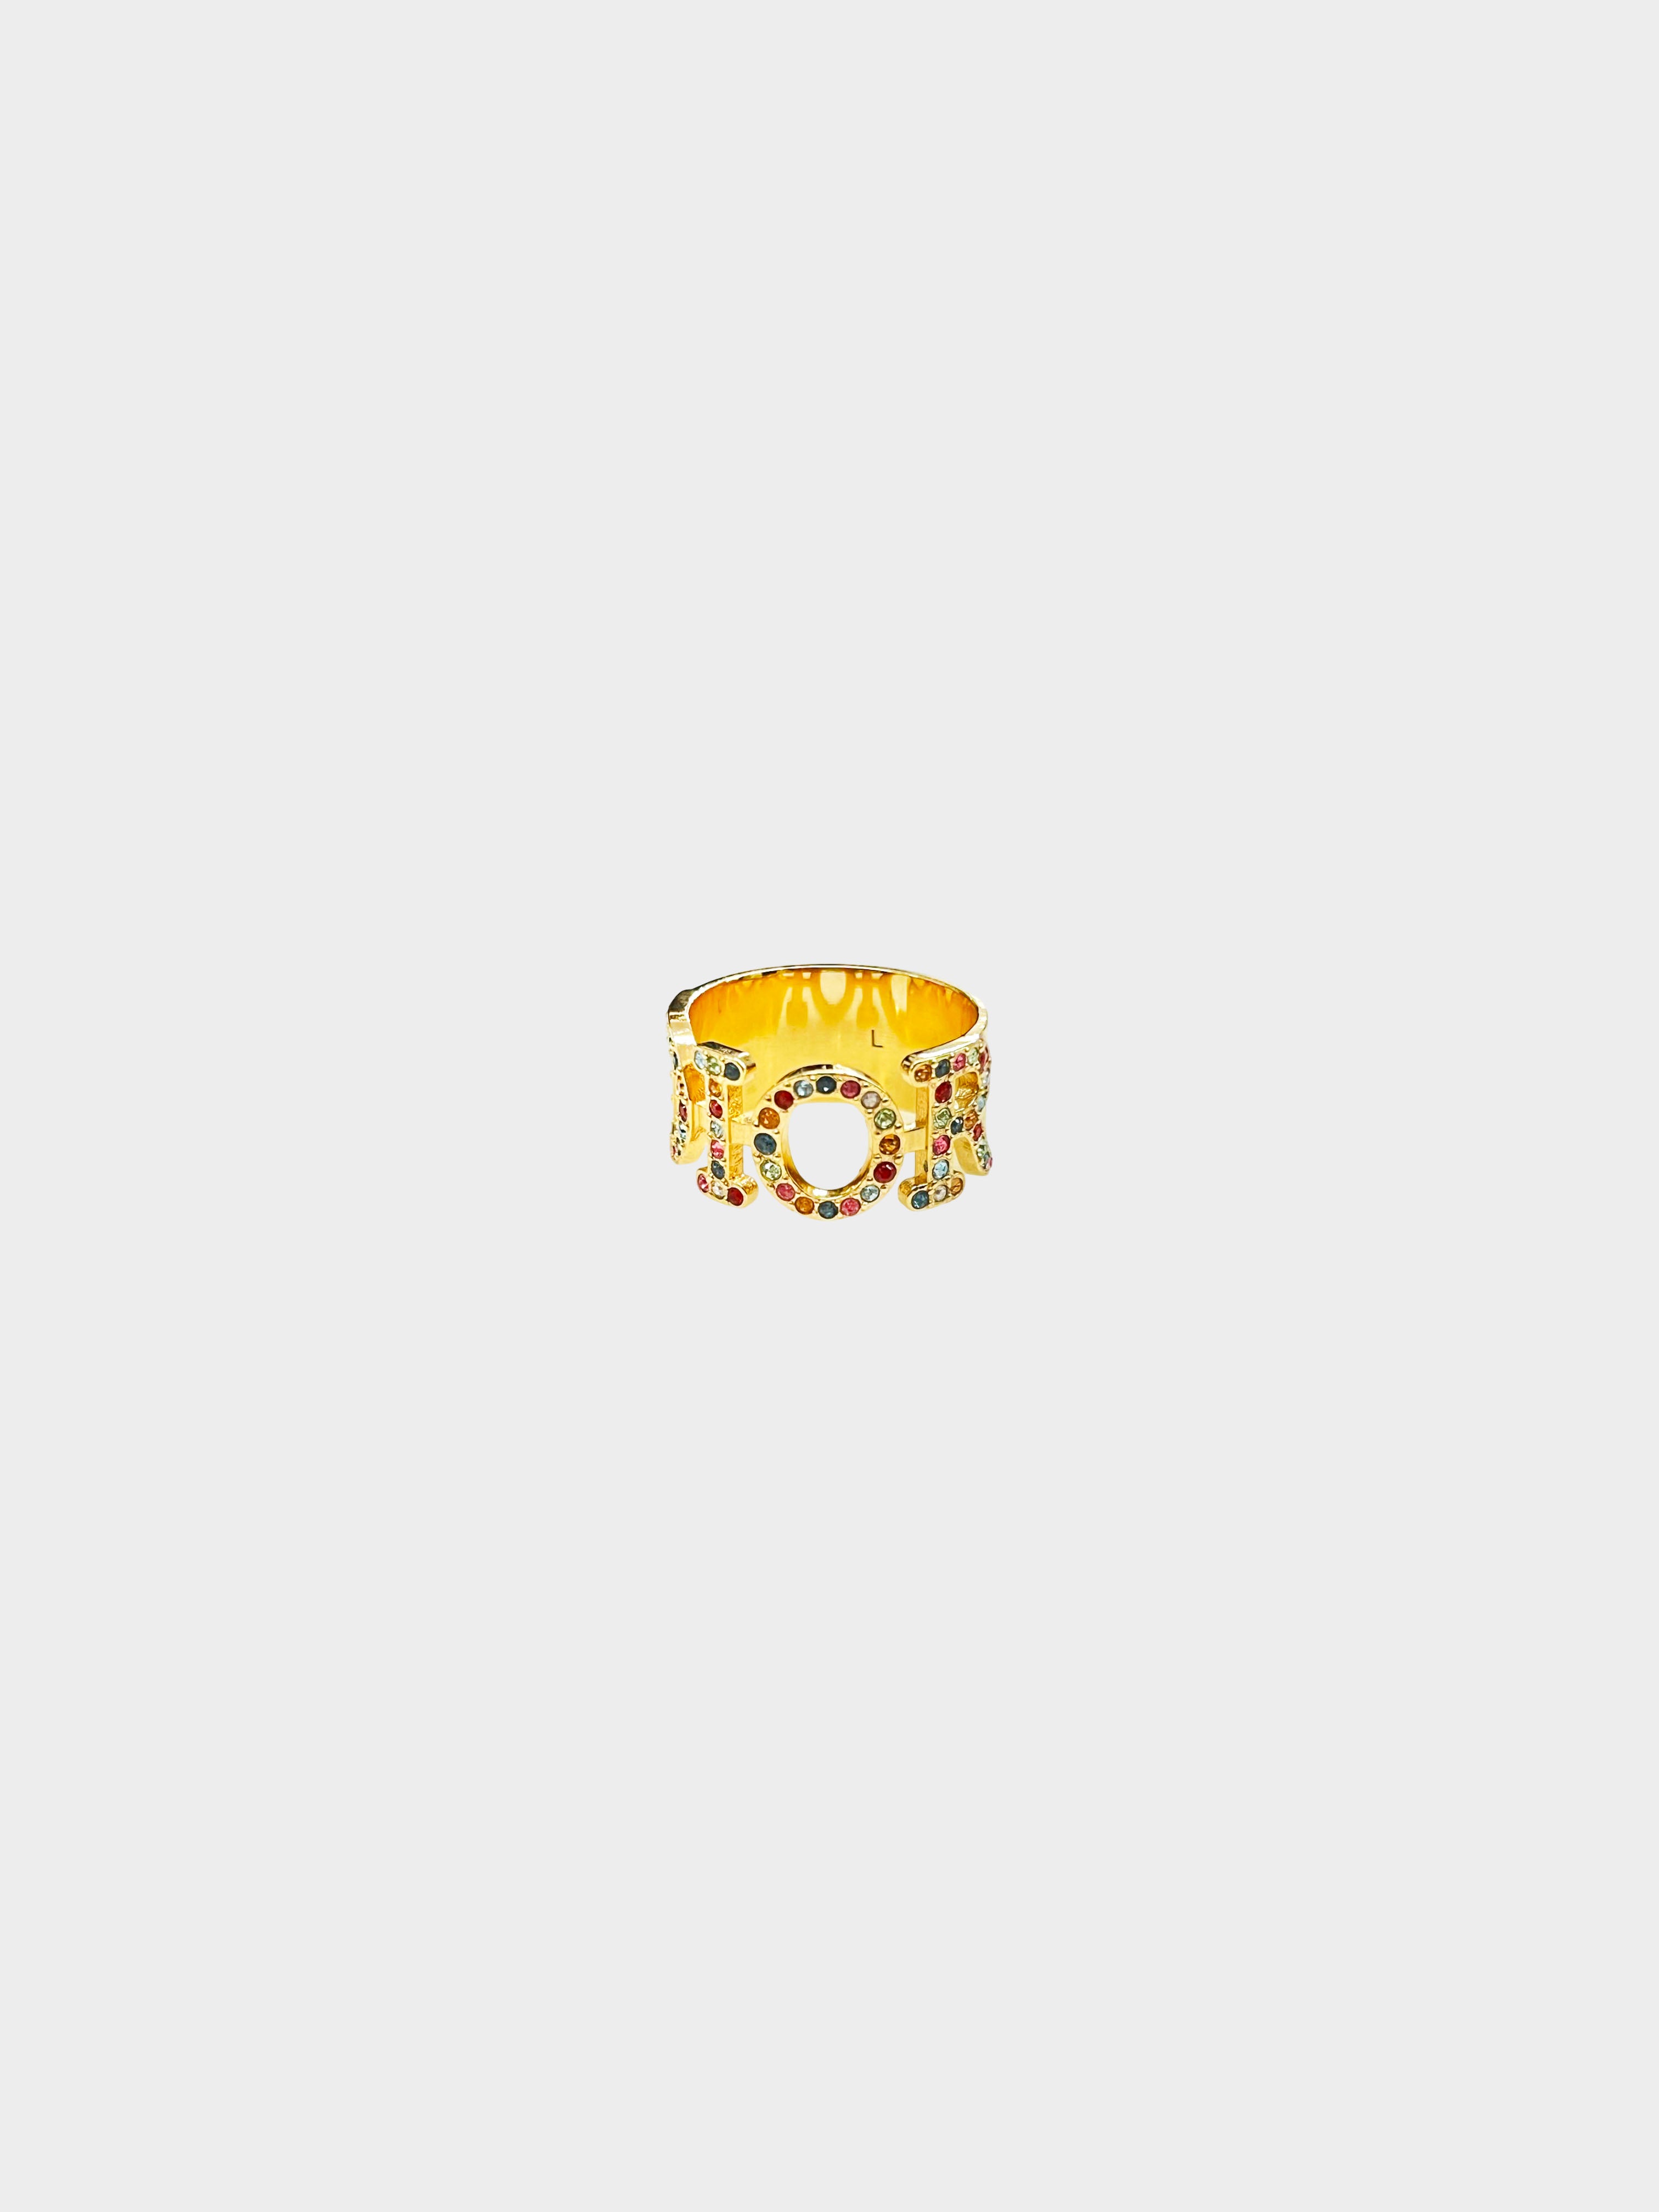 Christian Dior 2000s Multicolored Crystal Logo Ring